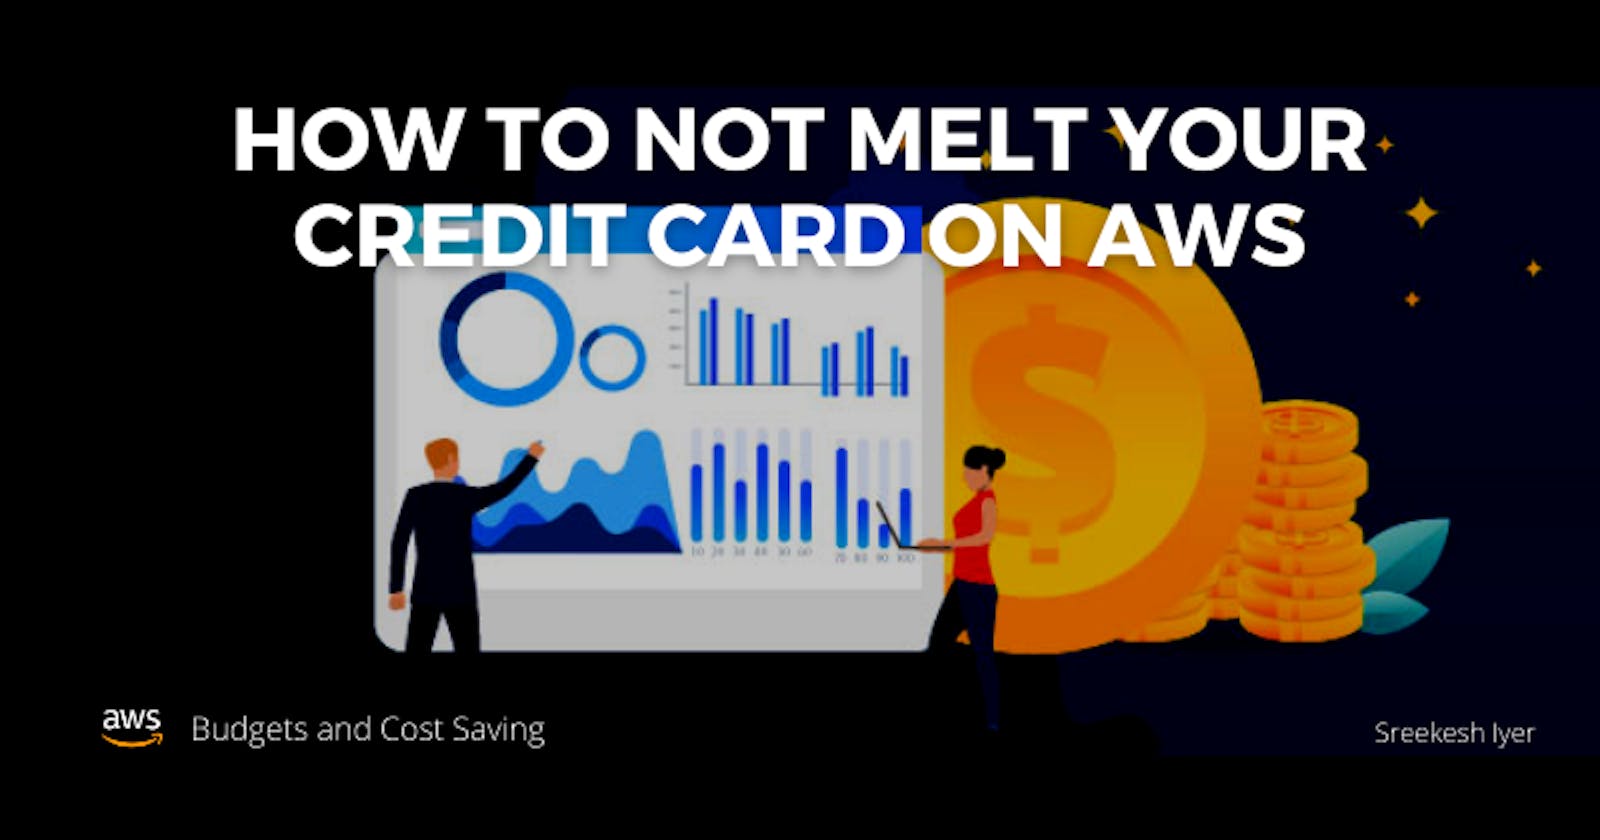 How to NOT melt your Credit Card on AWS